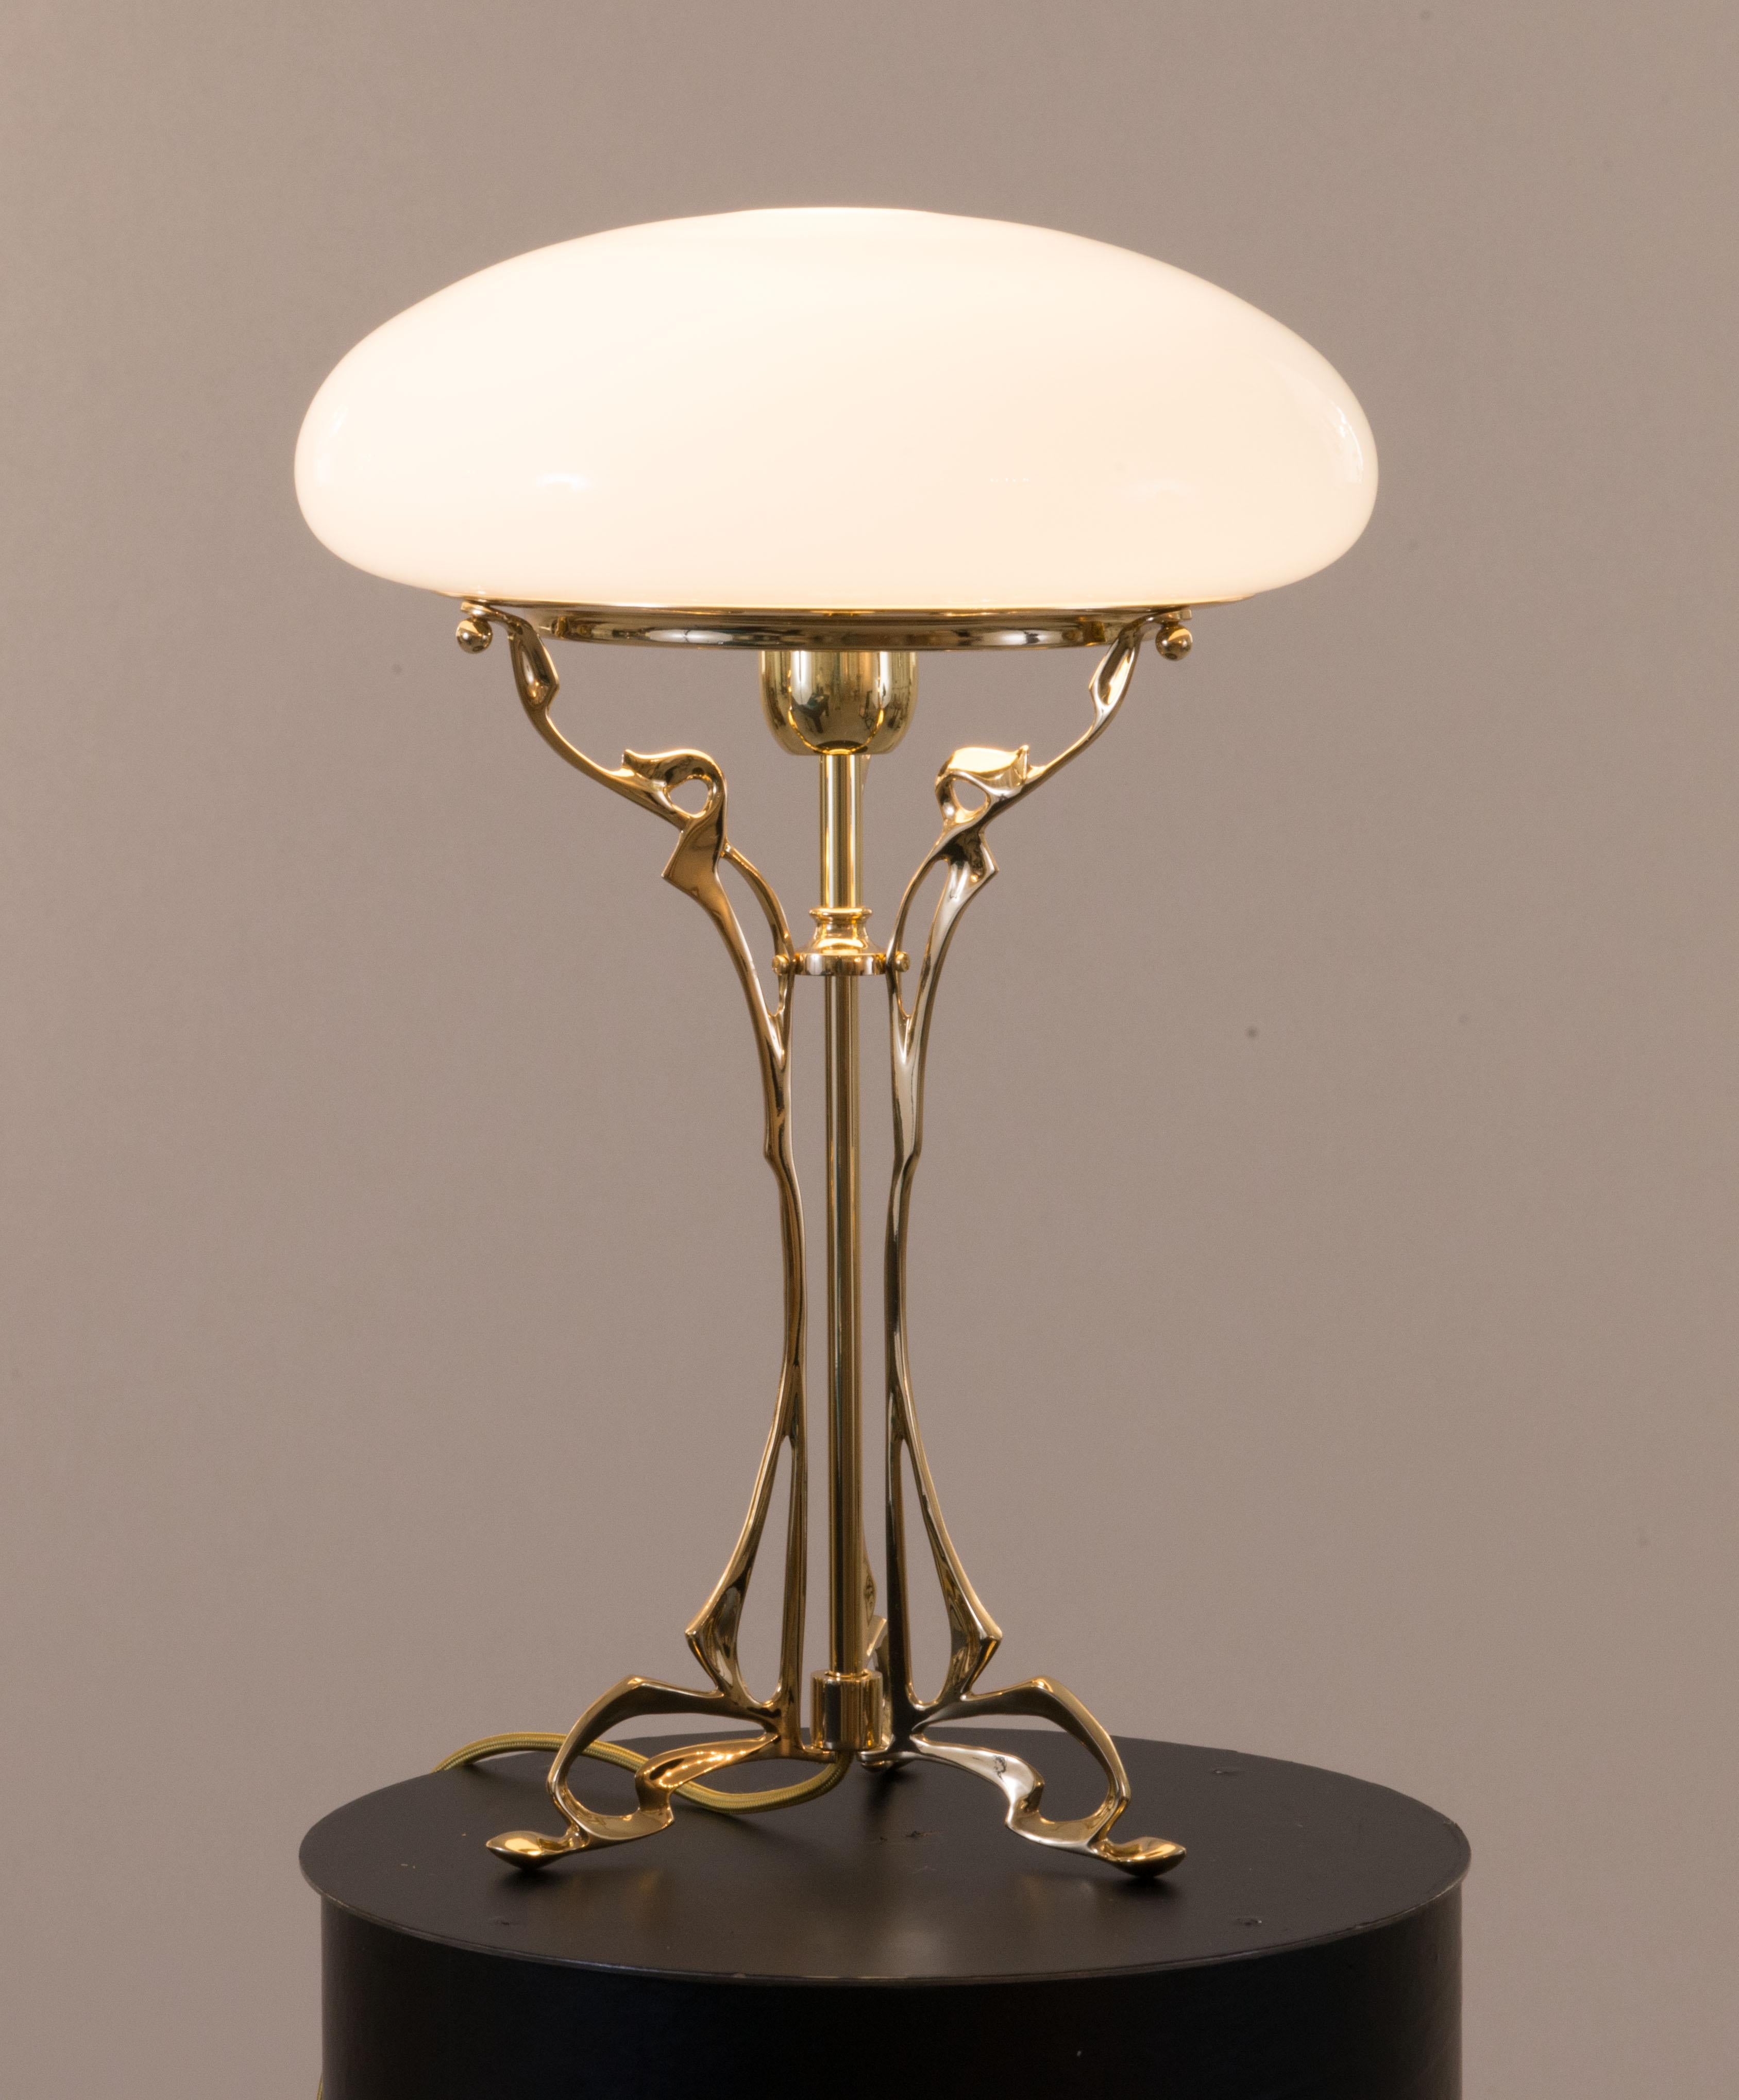 An excellent example of floral Jugendstil.
Hand formed sand casted brass-parts, hand blown opaline-glass.
Can be fixed on a table as well

Most components according to the UL regulations, with an additional charge we will UL-list and label our